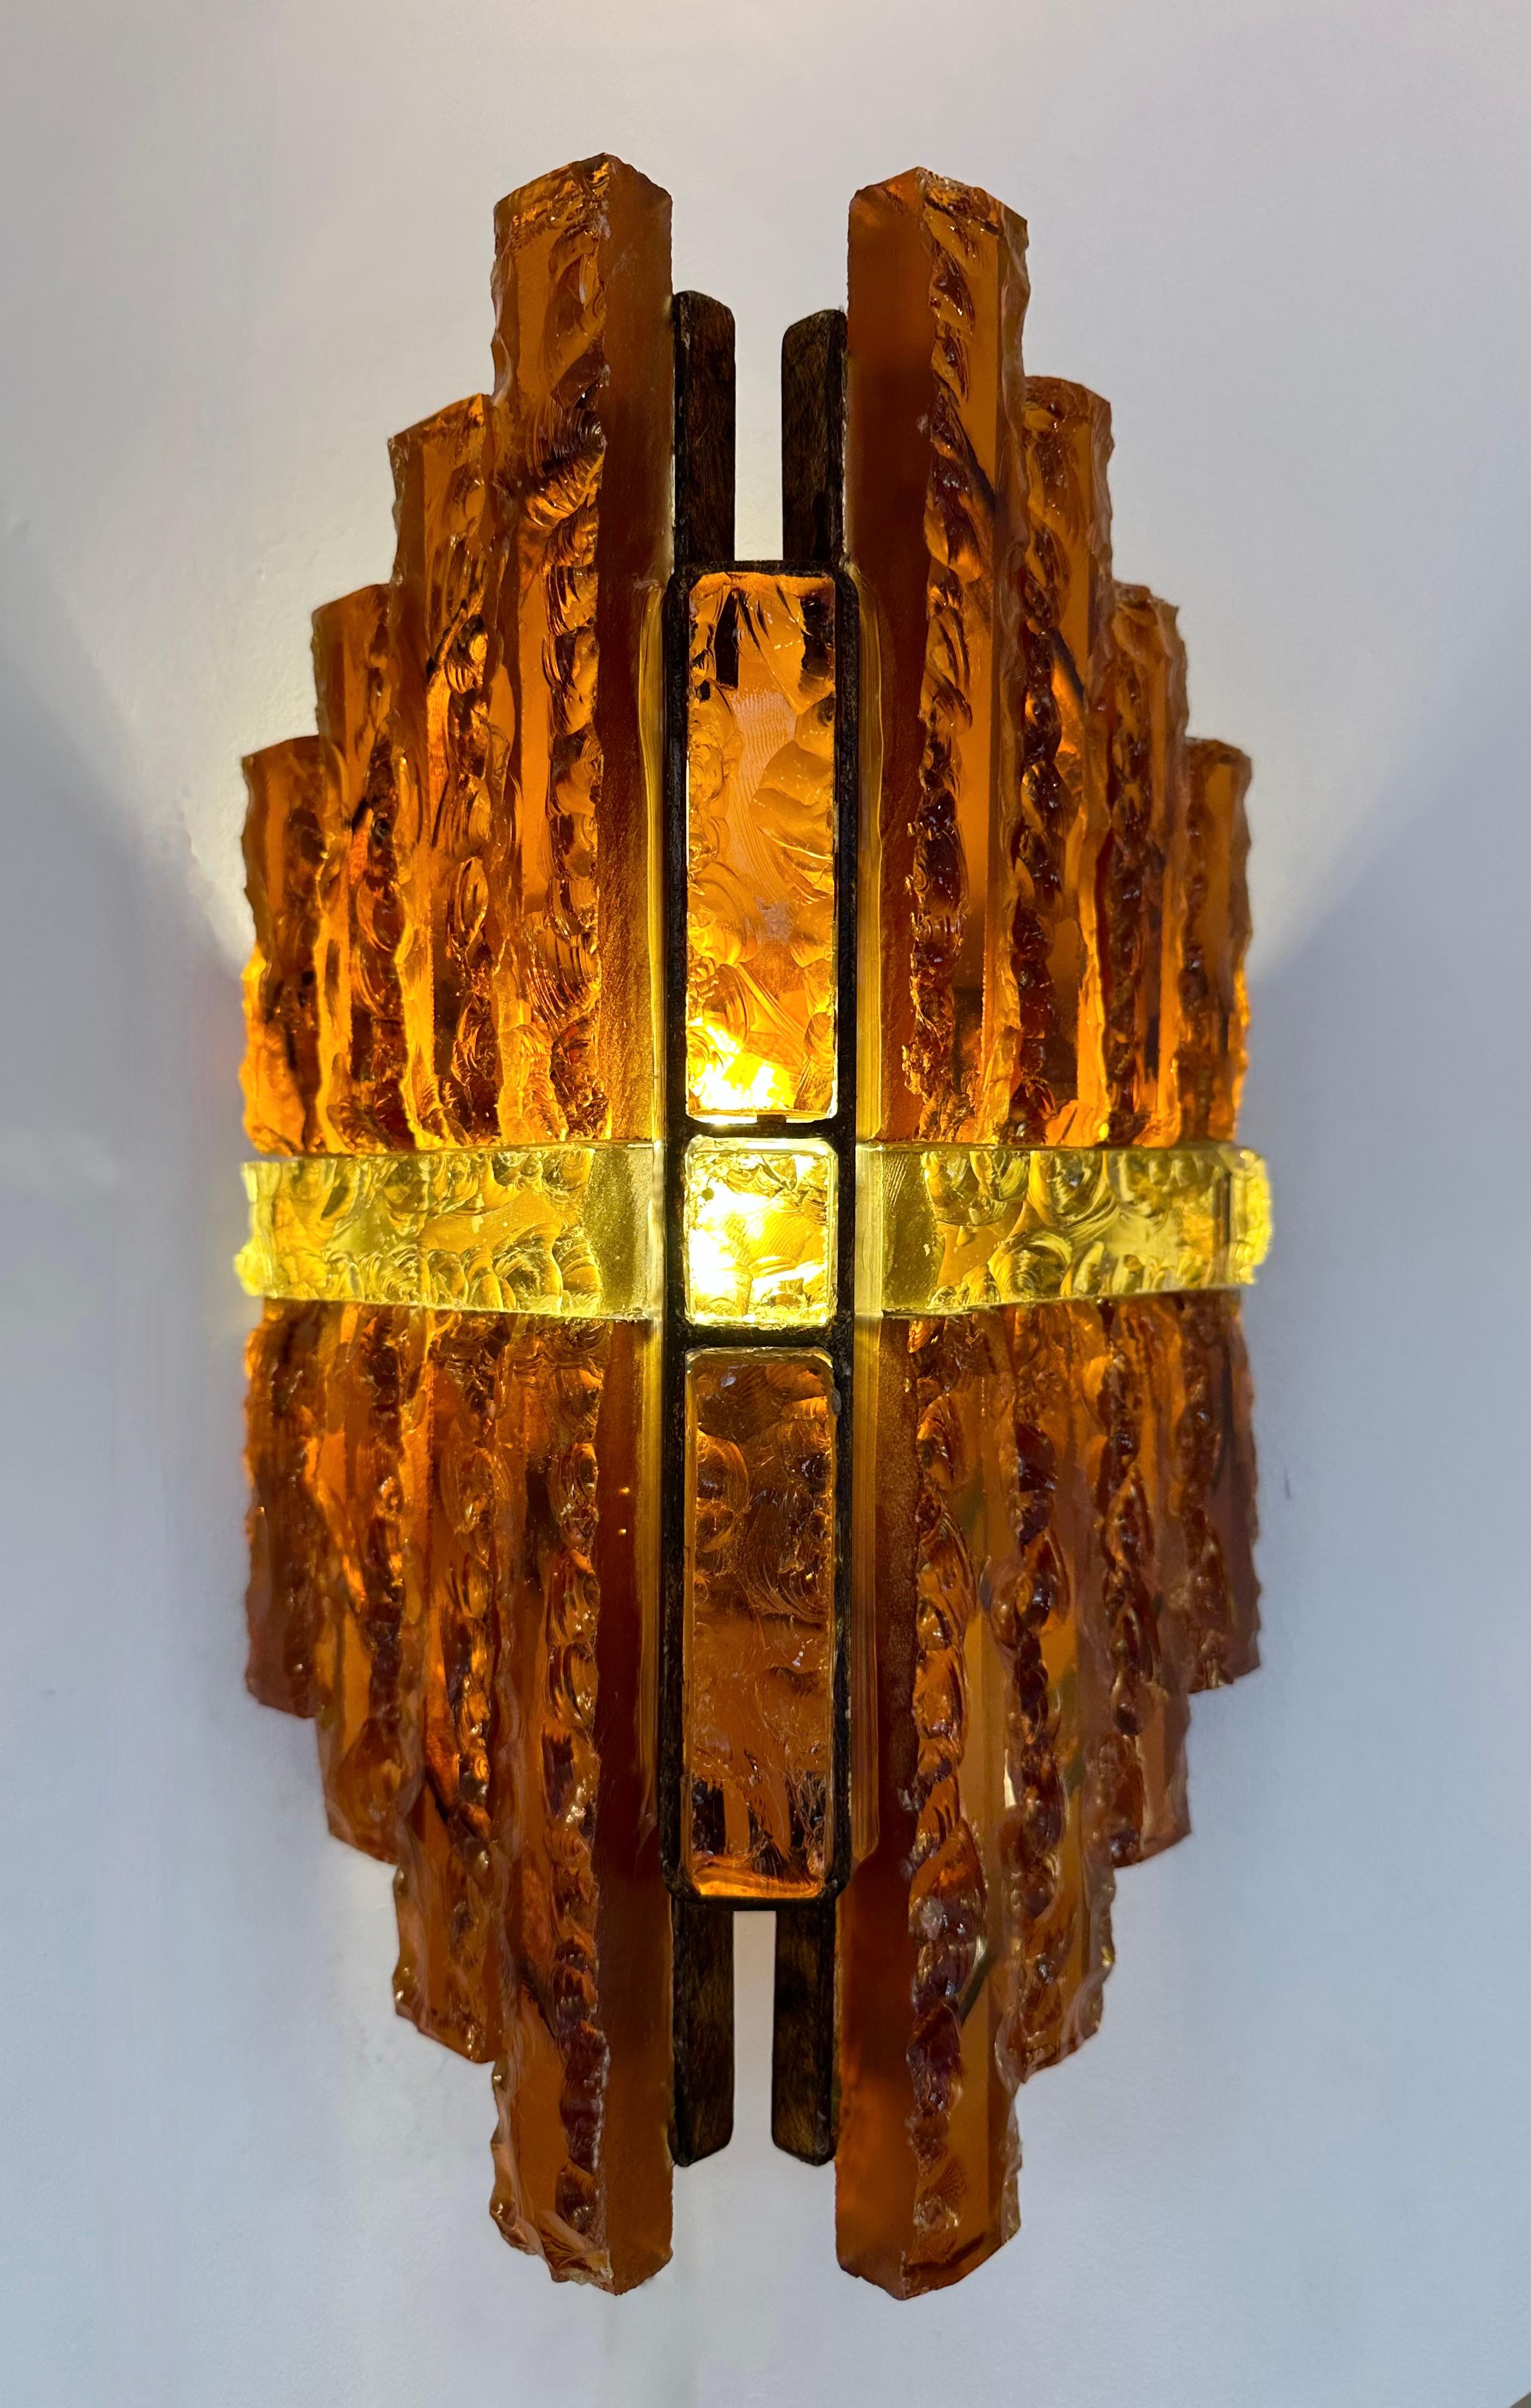 Pair of Hammered Glass Wrought Iron Sconces by Longobard, Italy, 1970s For Sale 2